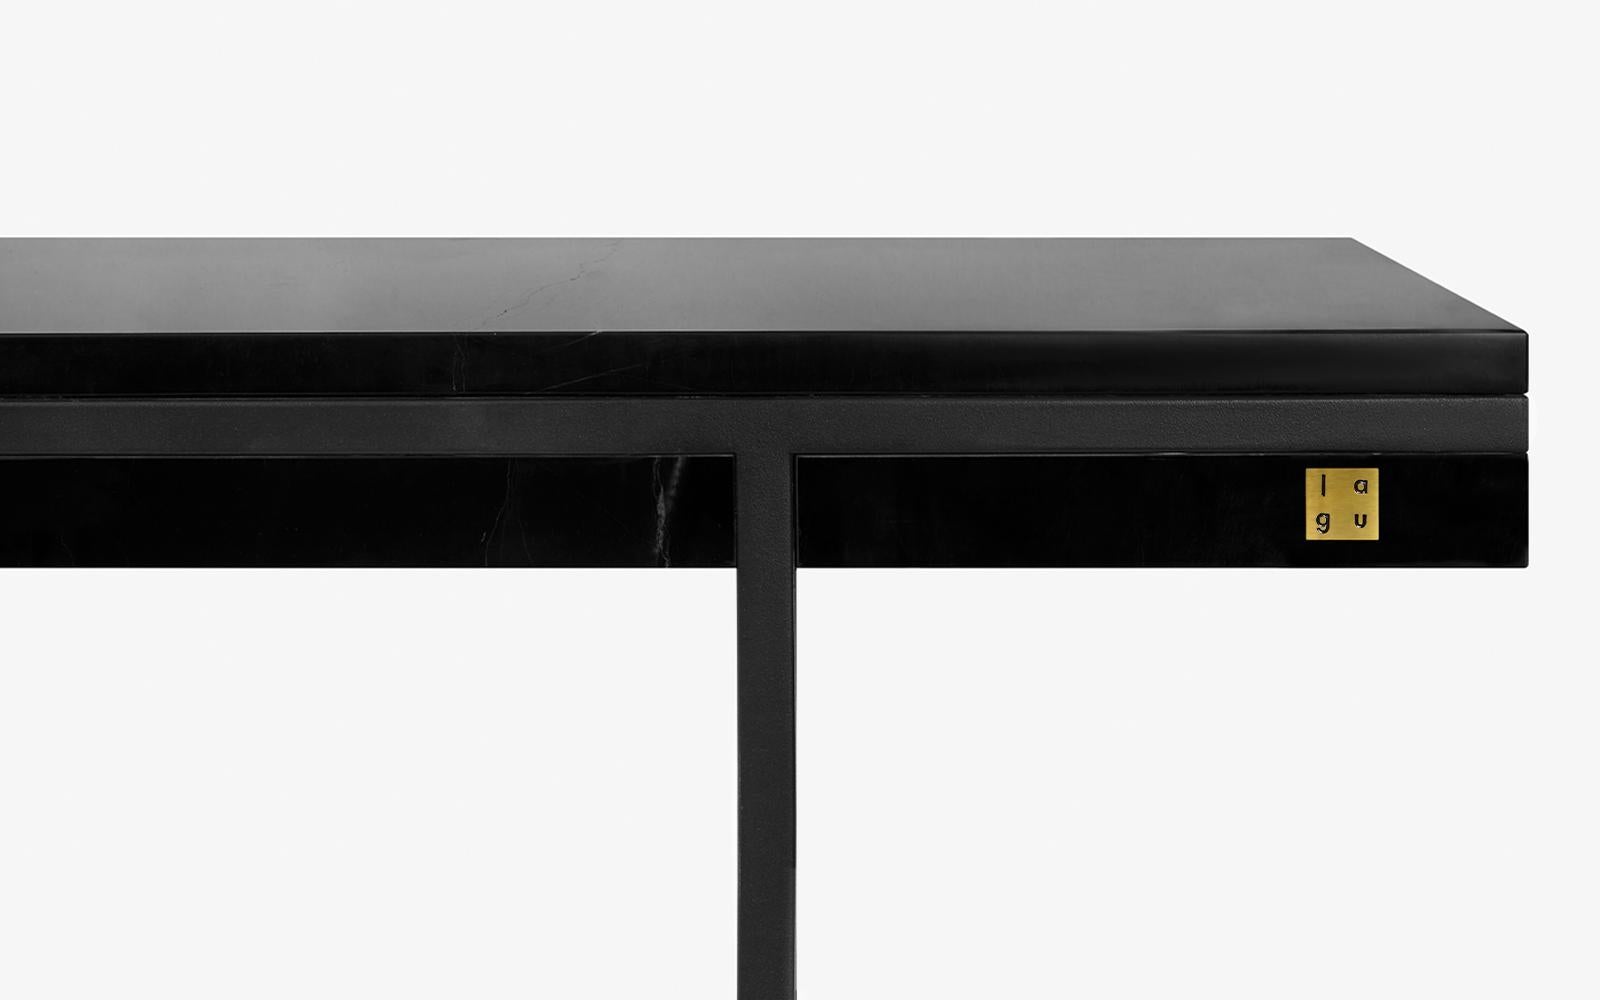 **It id display item. 

The Hidden sideboard is encased in Black marble highlighted with metal accents, incorporating a simple design.

Materials:
-Alexander black marble
-Black painted metal
-Registered design

Alternatives:
-Light walnut / natural